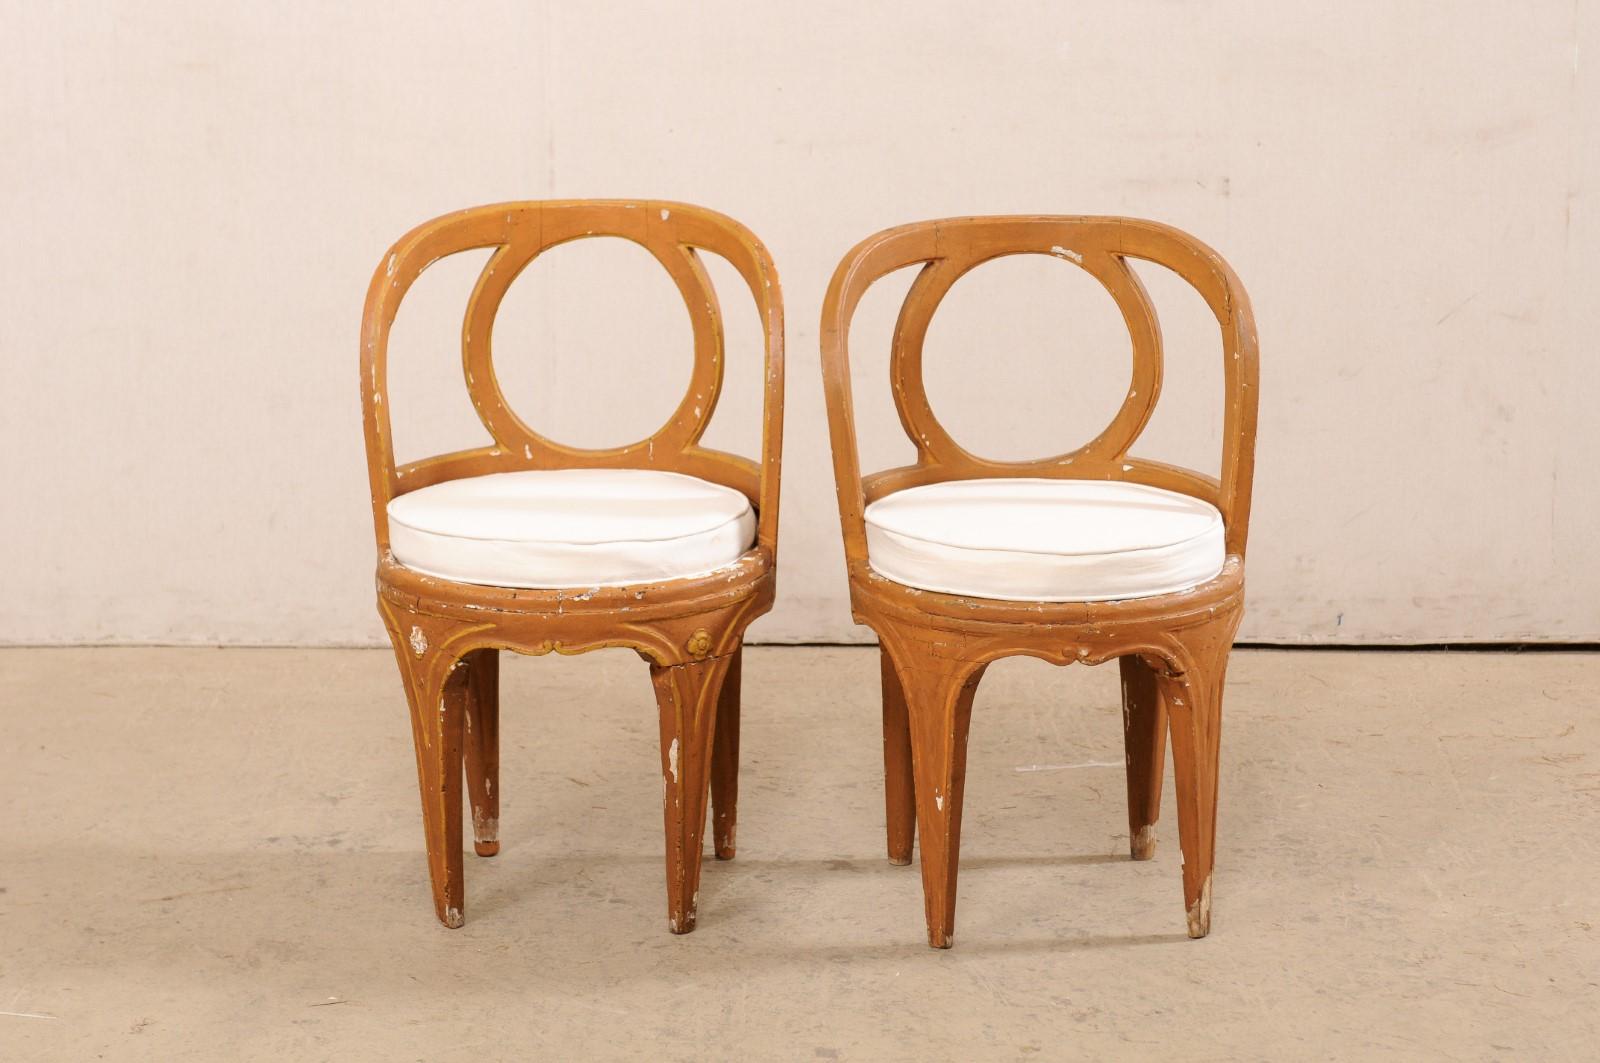 18th Century Pair of Italian Venetian Chairs with New Removable Seat Cushions For Sale 5